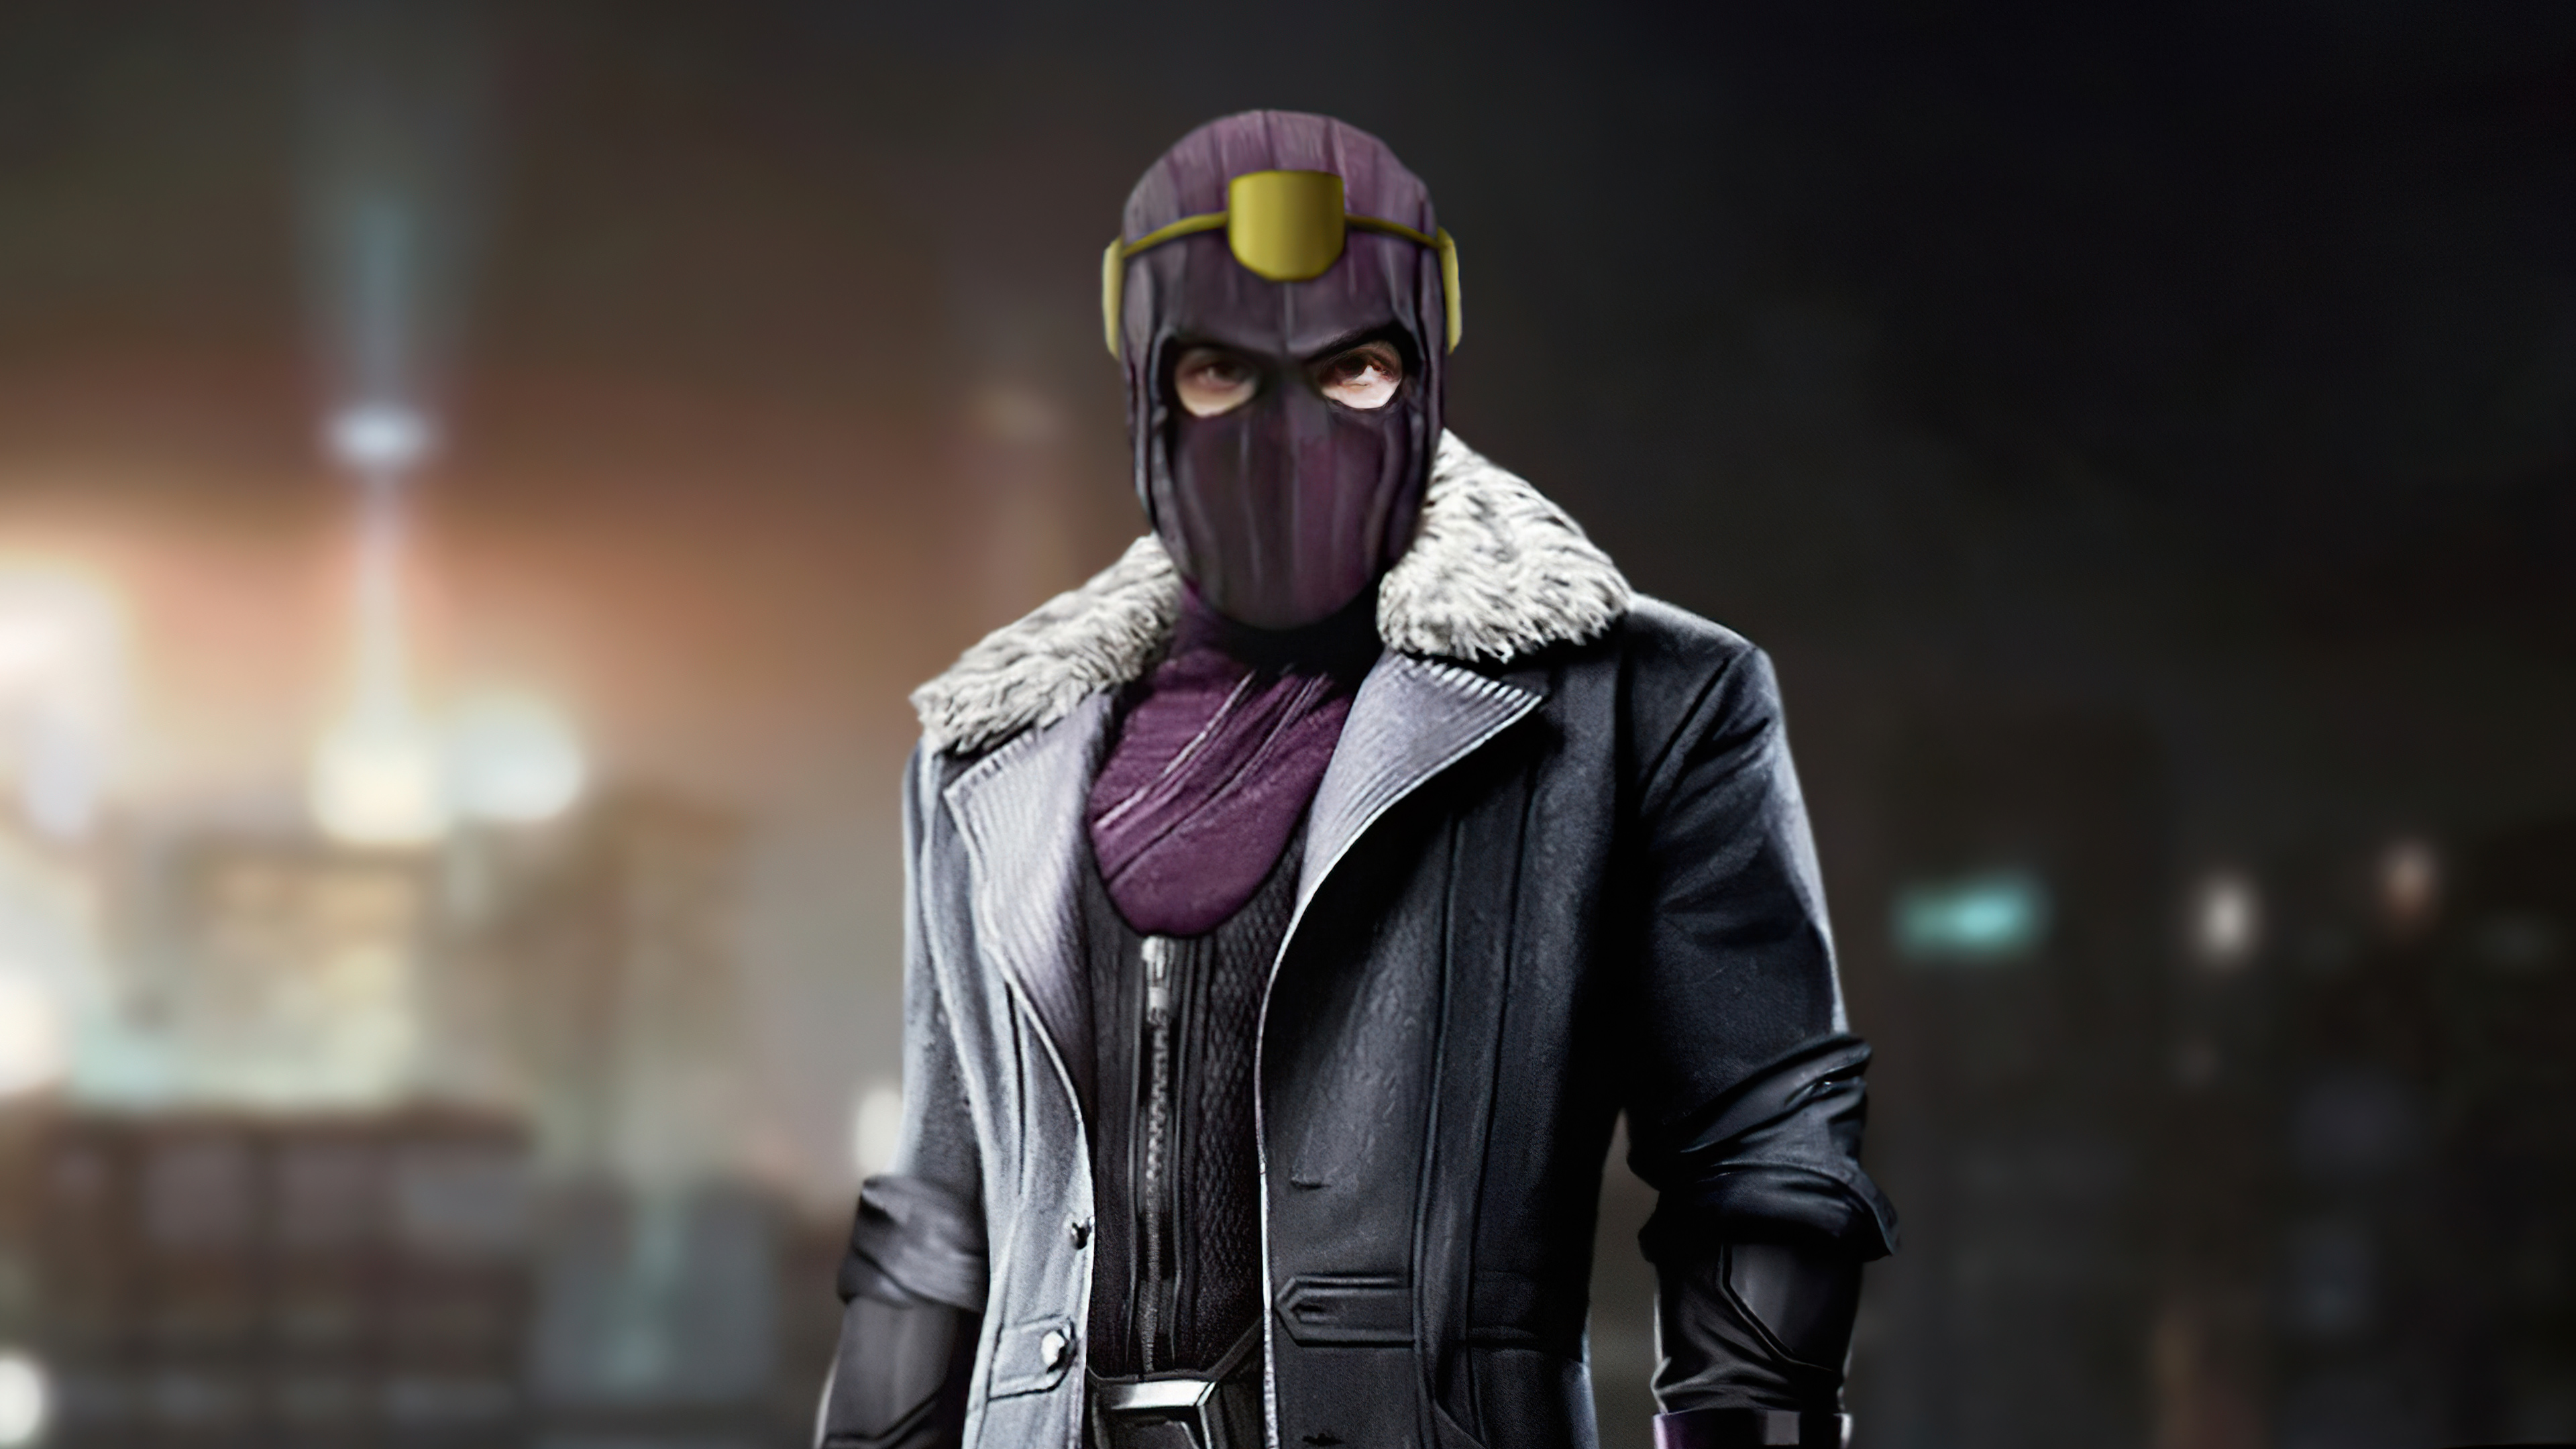 Baron Zemo Falcon And The Winter Soldier 4k, HD Tv Shows, 4k Wallpaper, Image, Background, Photo and Picture